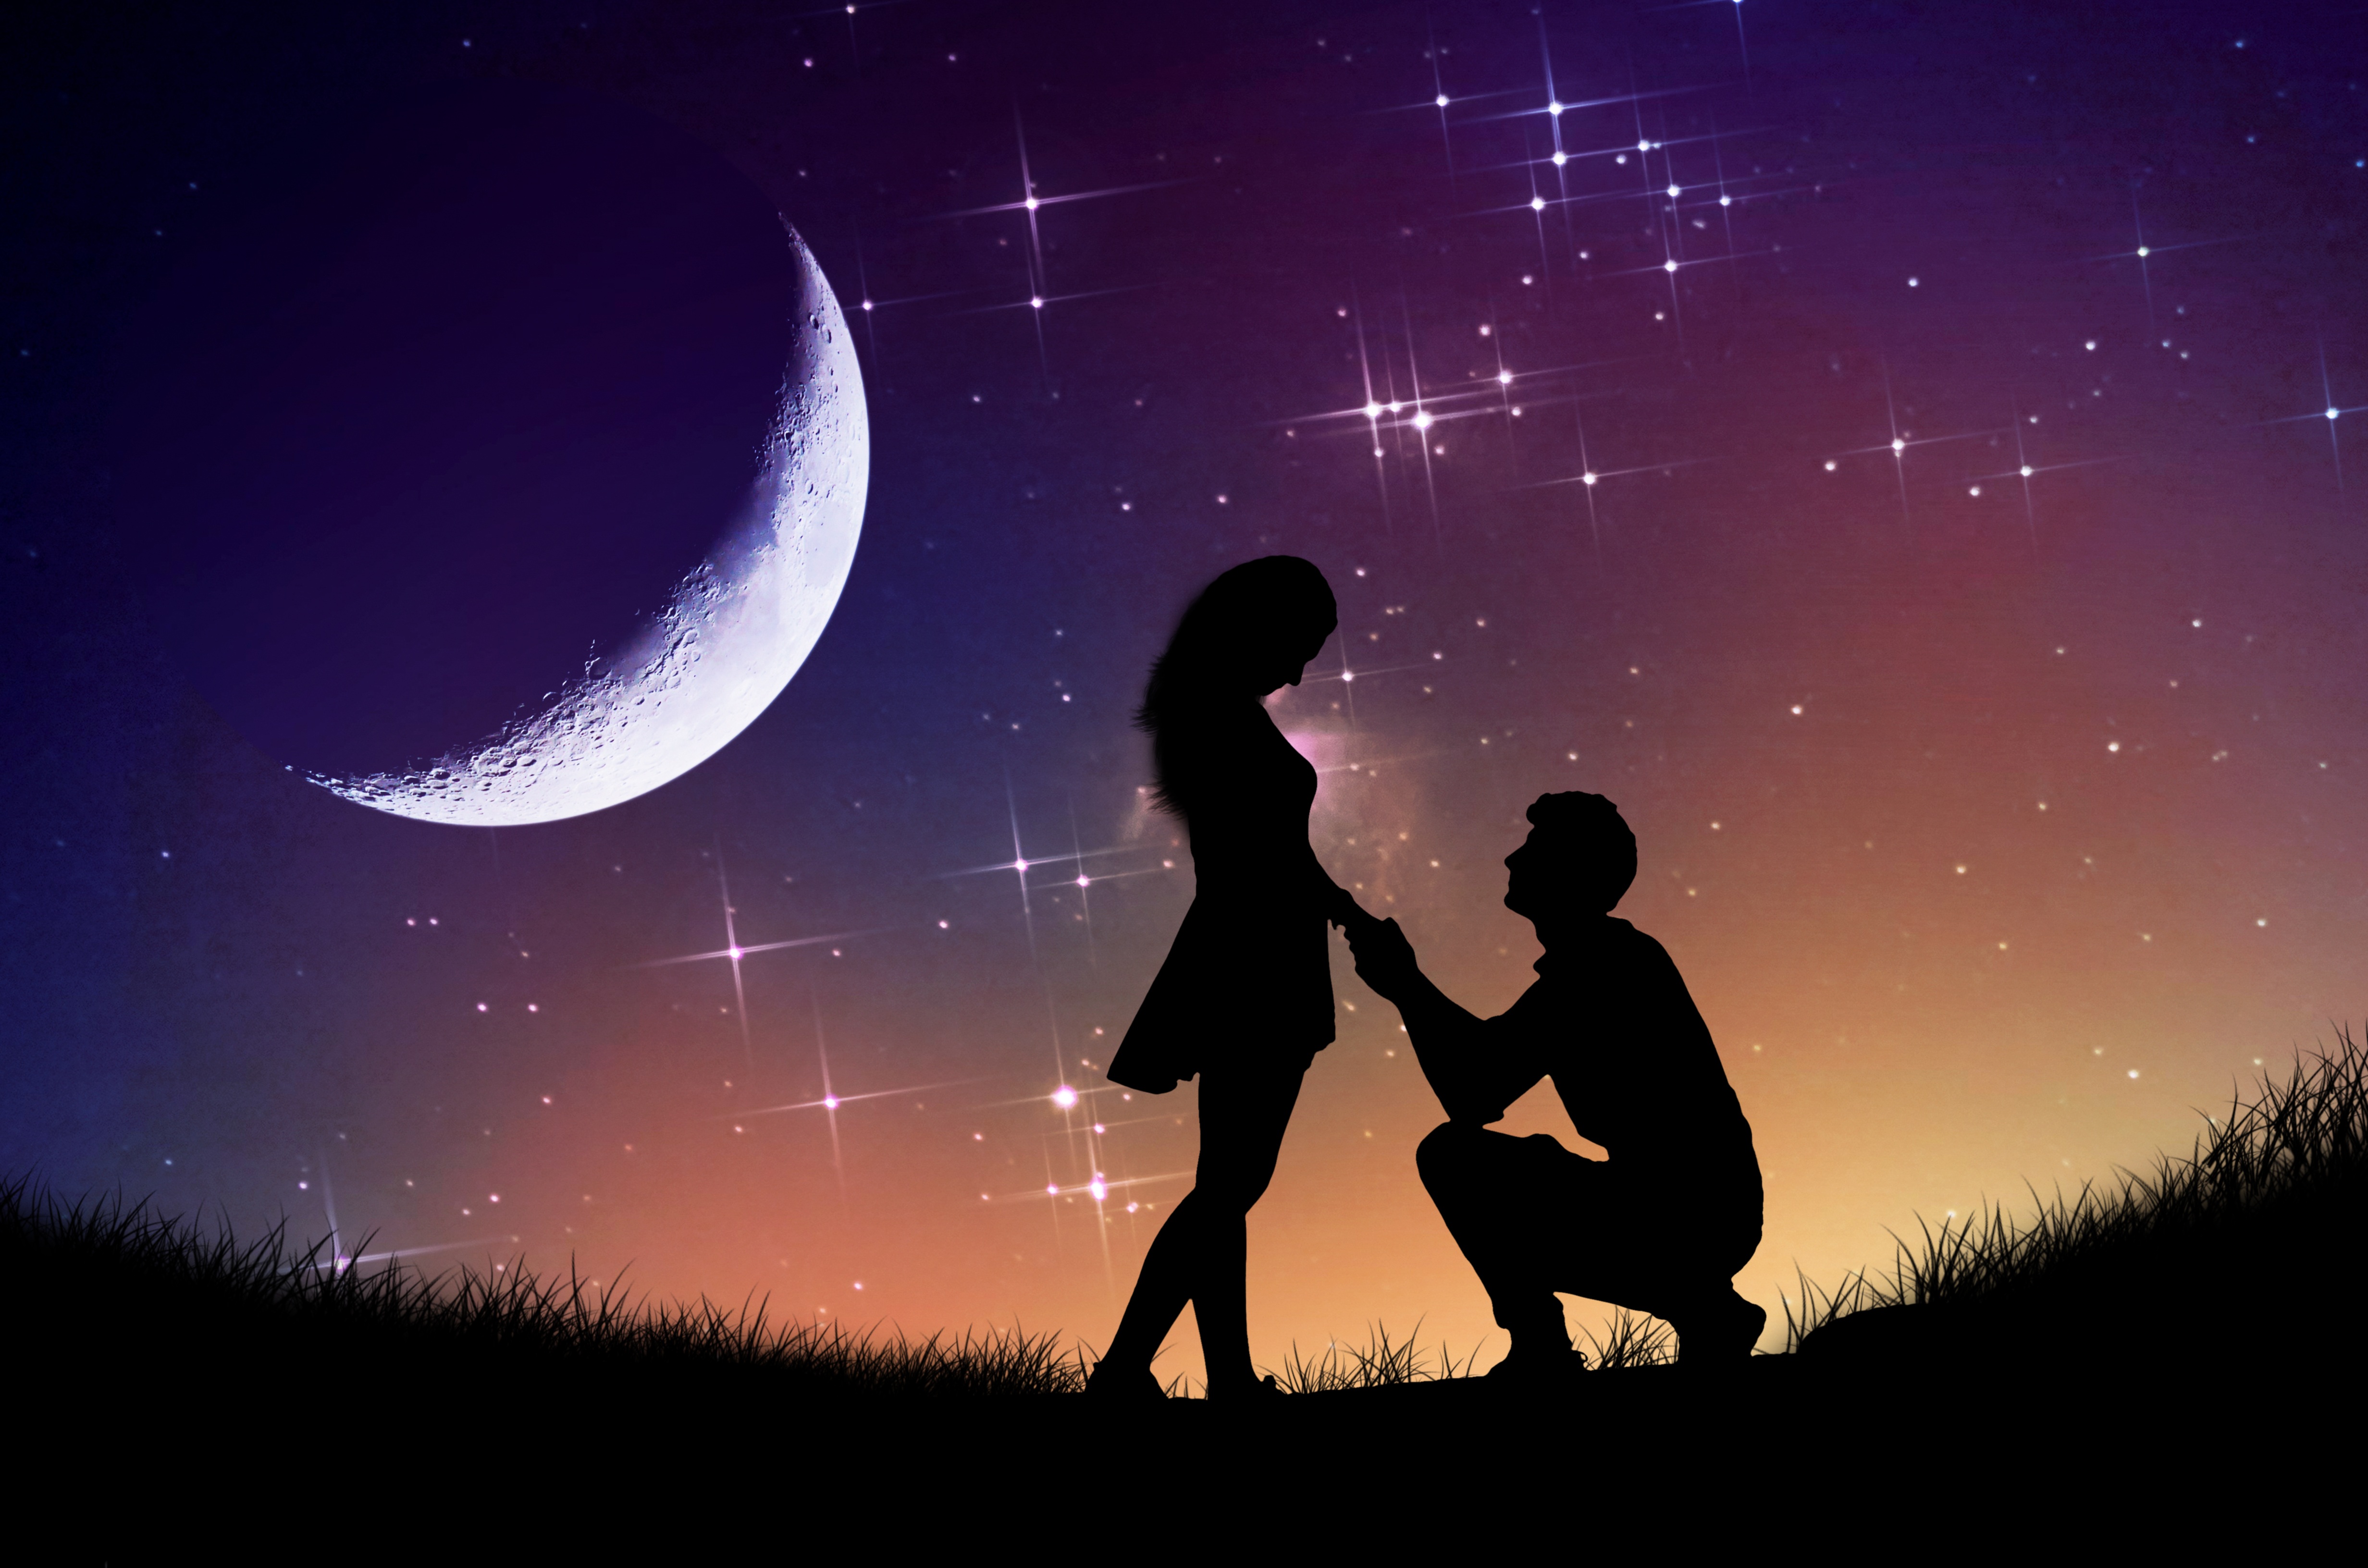 Clipart Of Couple Silhouette Love Romance Free Image Download